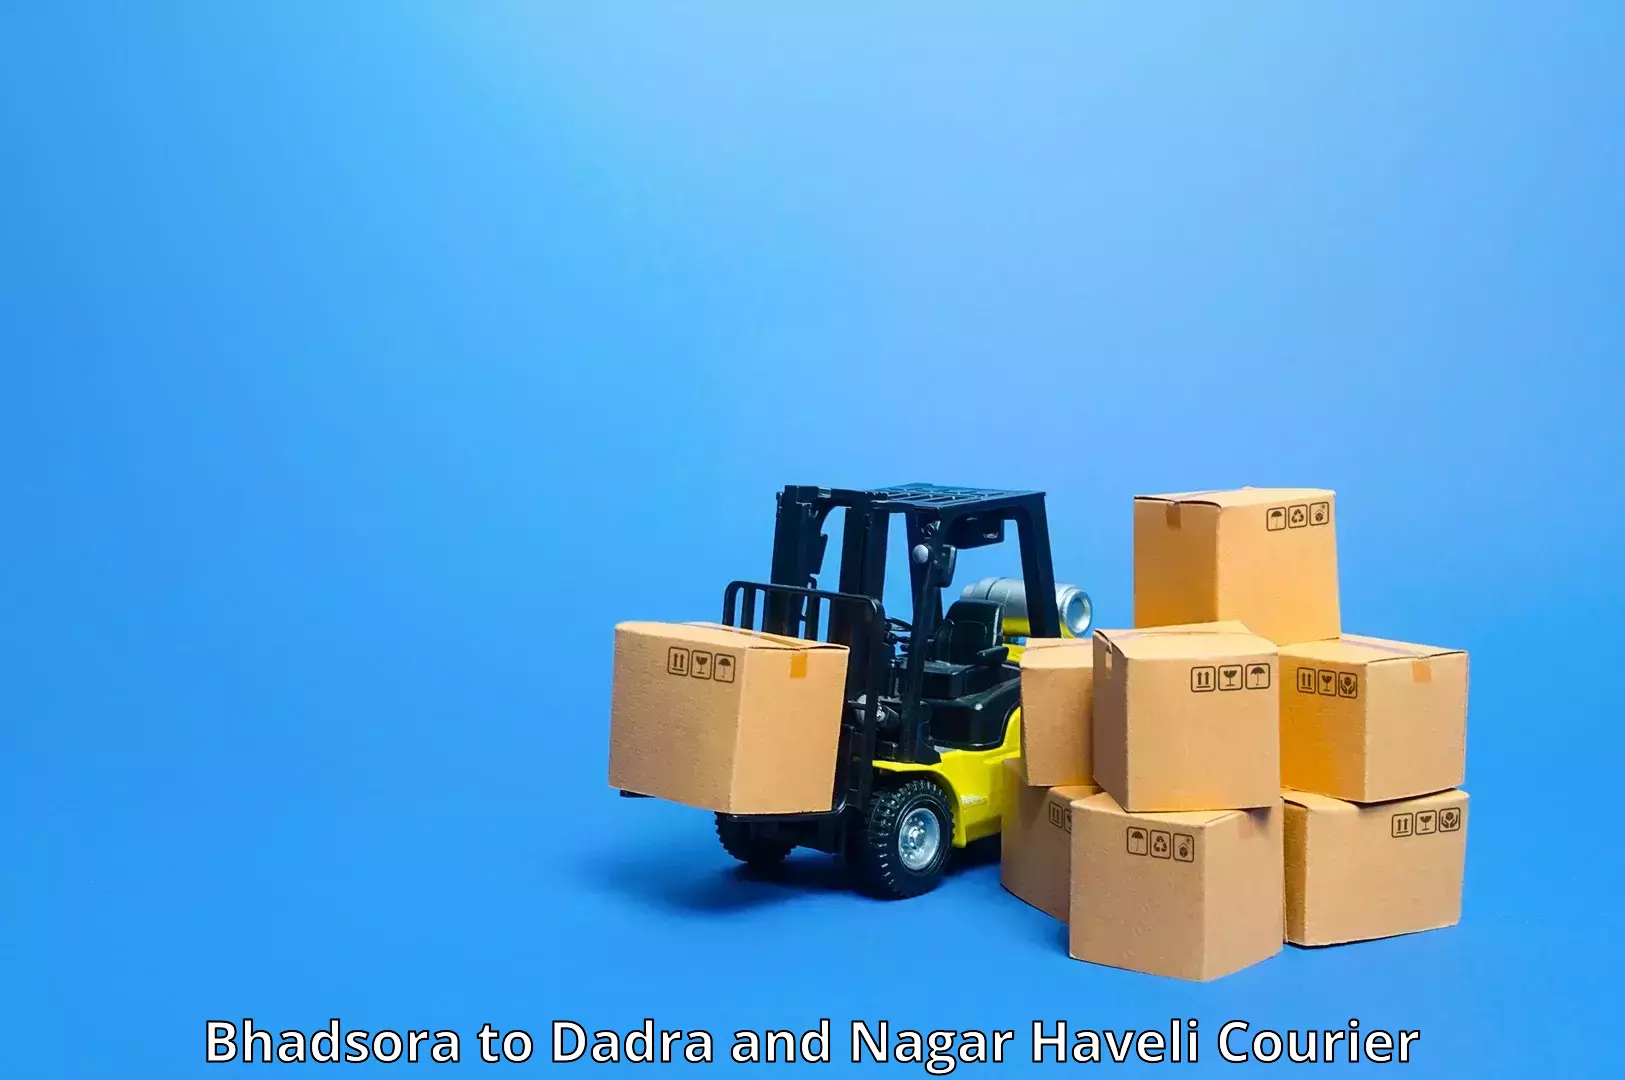 Global courier networks Bhadsora to Dadra and Nagar Haveli